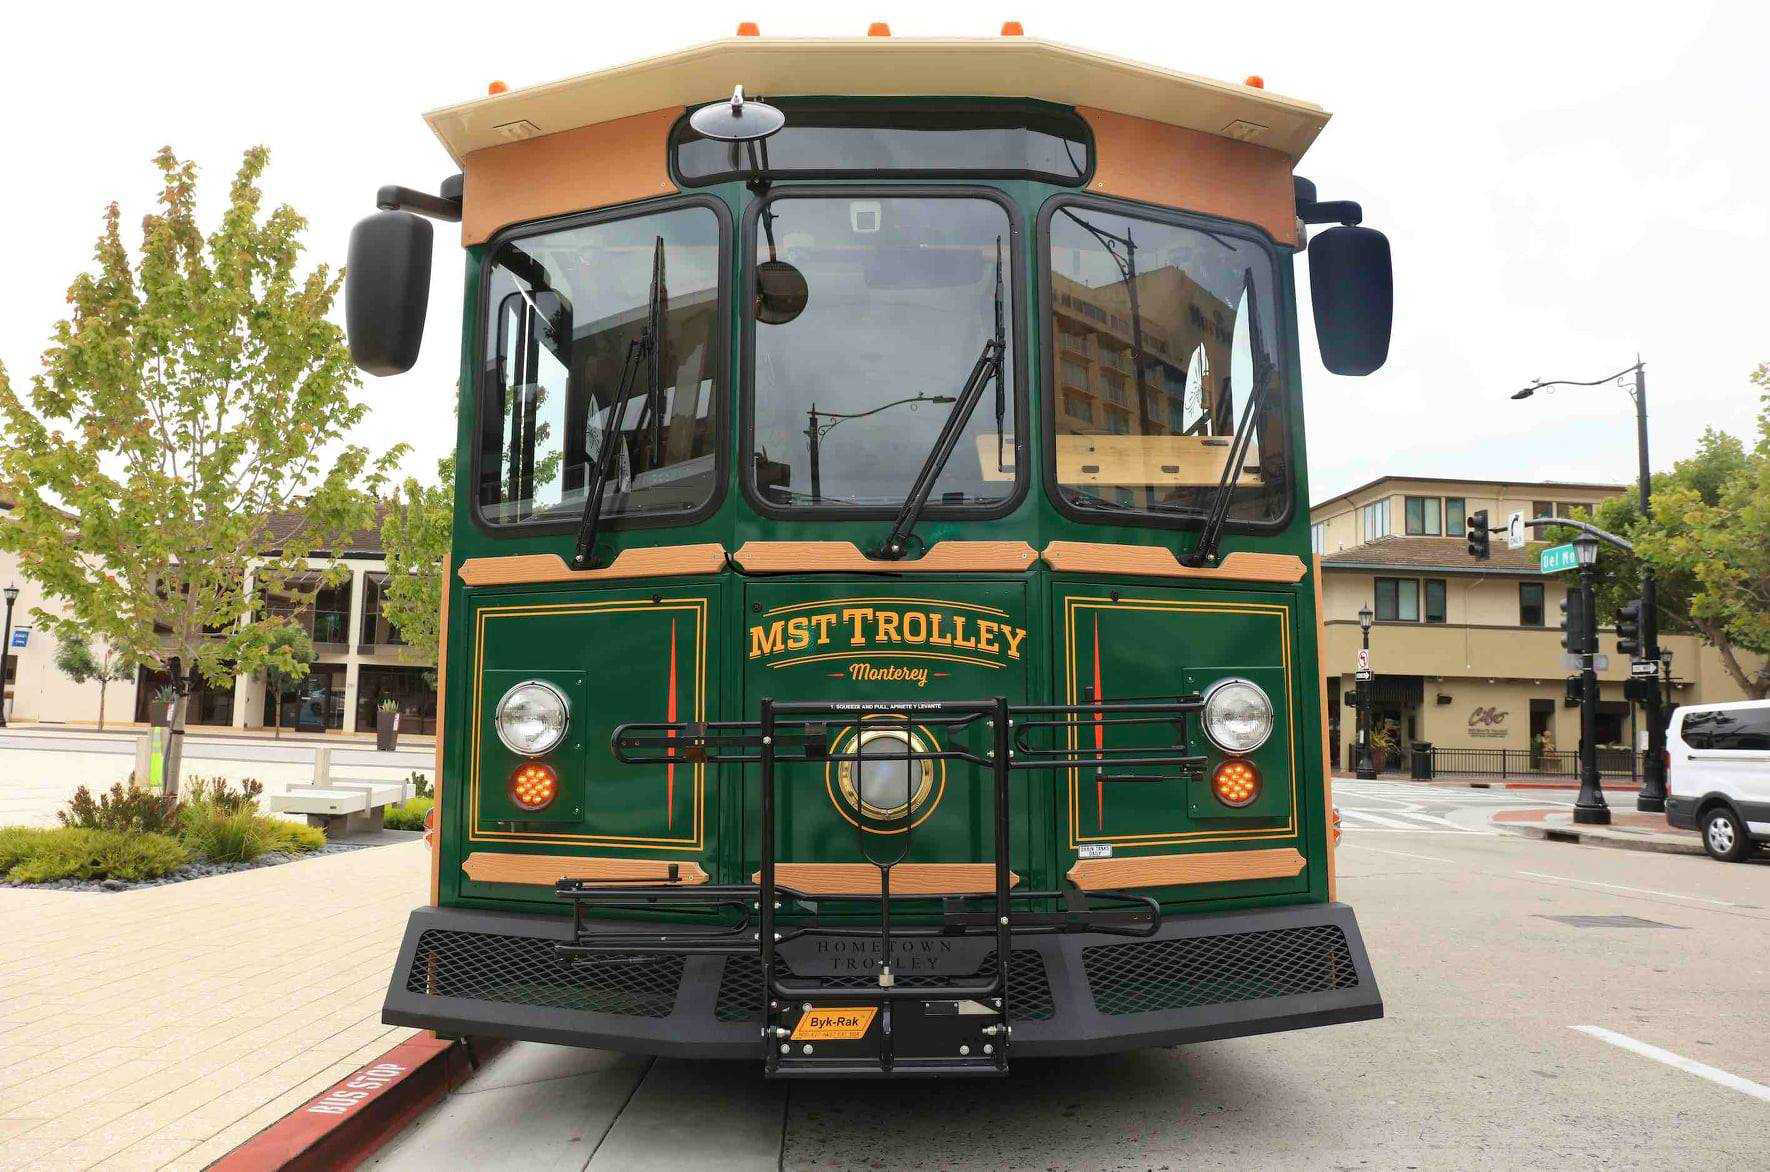 Monterey trolley ride returns for the summer